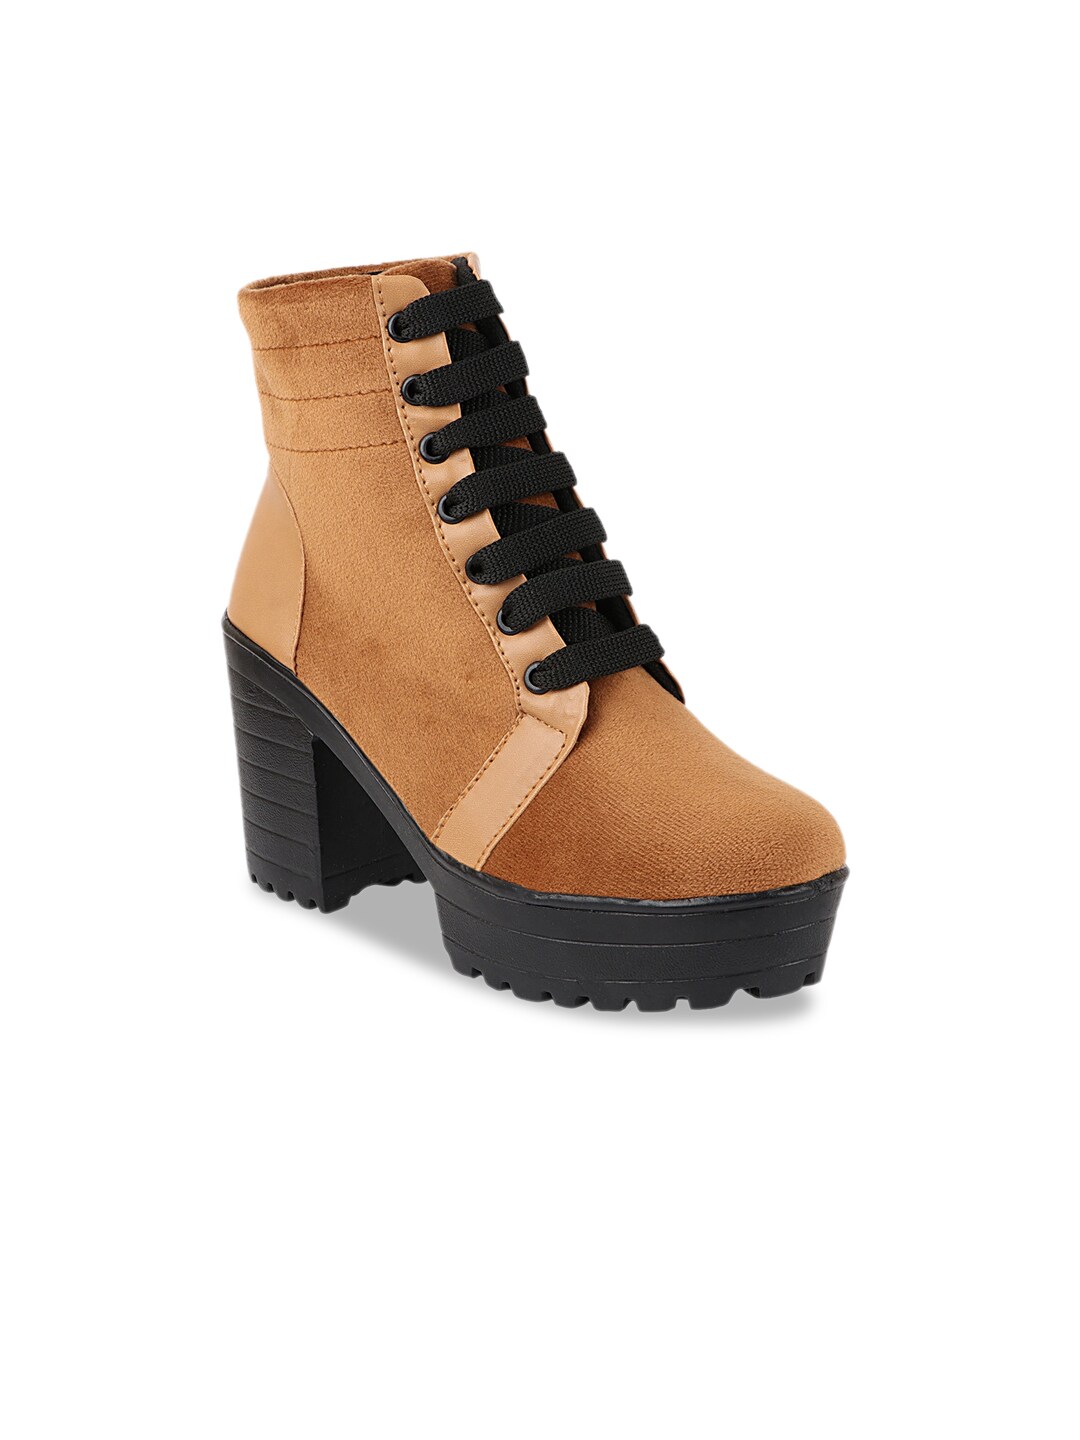 Shoetopia Tan Suede Wedge Heeled Boots Price in India